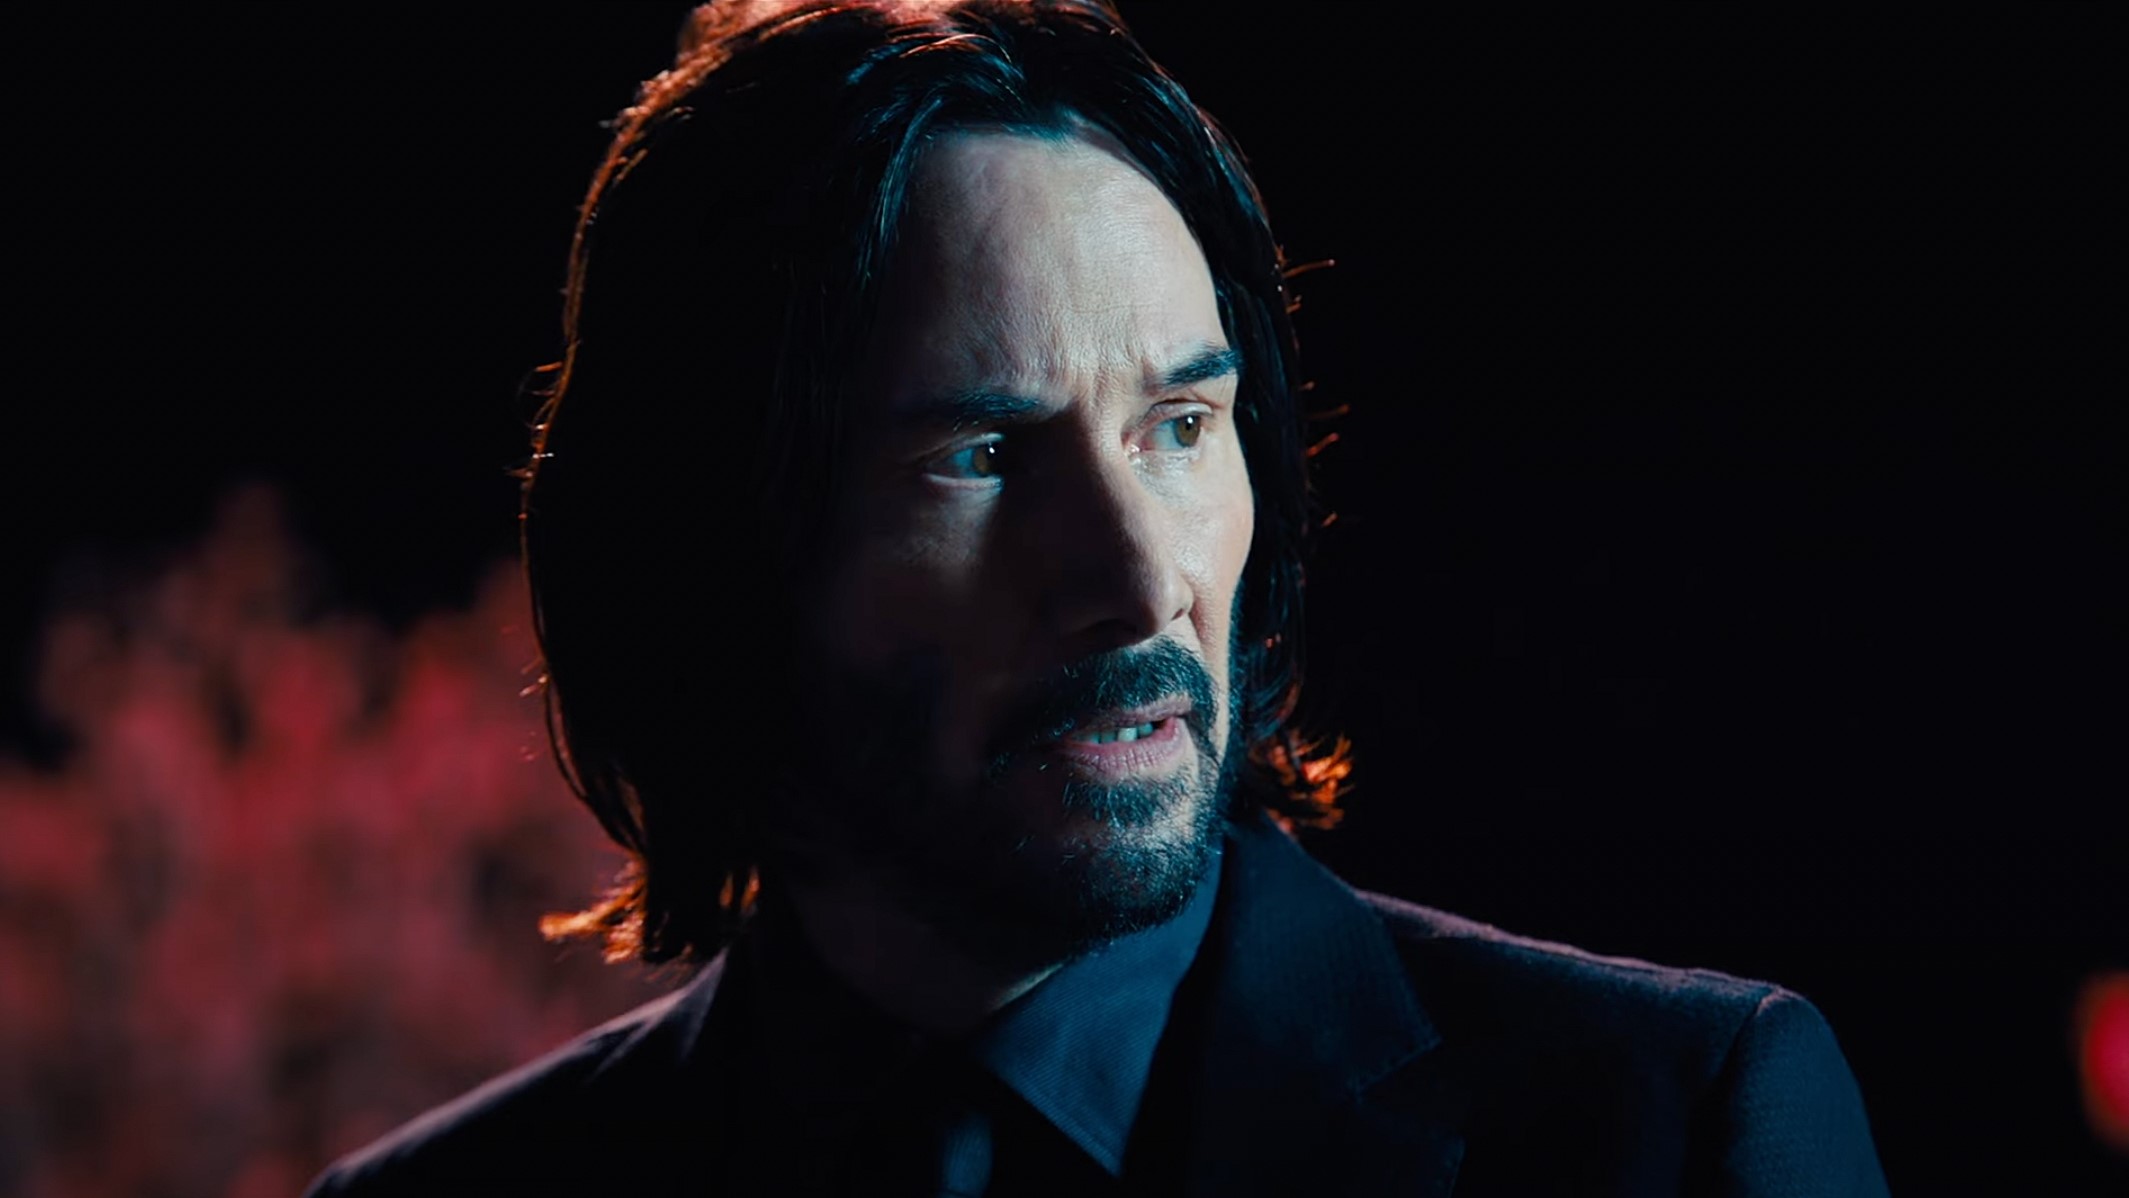 New John Wick: Chapter 4 Clip Teases Keanu Reeves Versus Donnie Yen